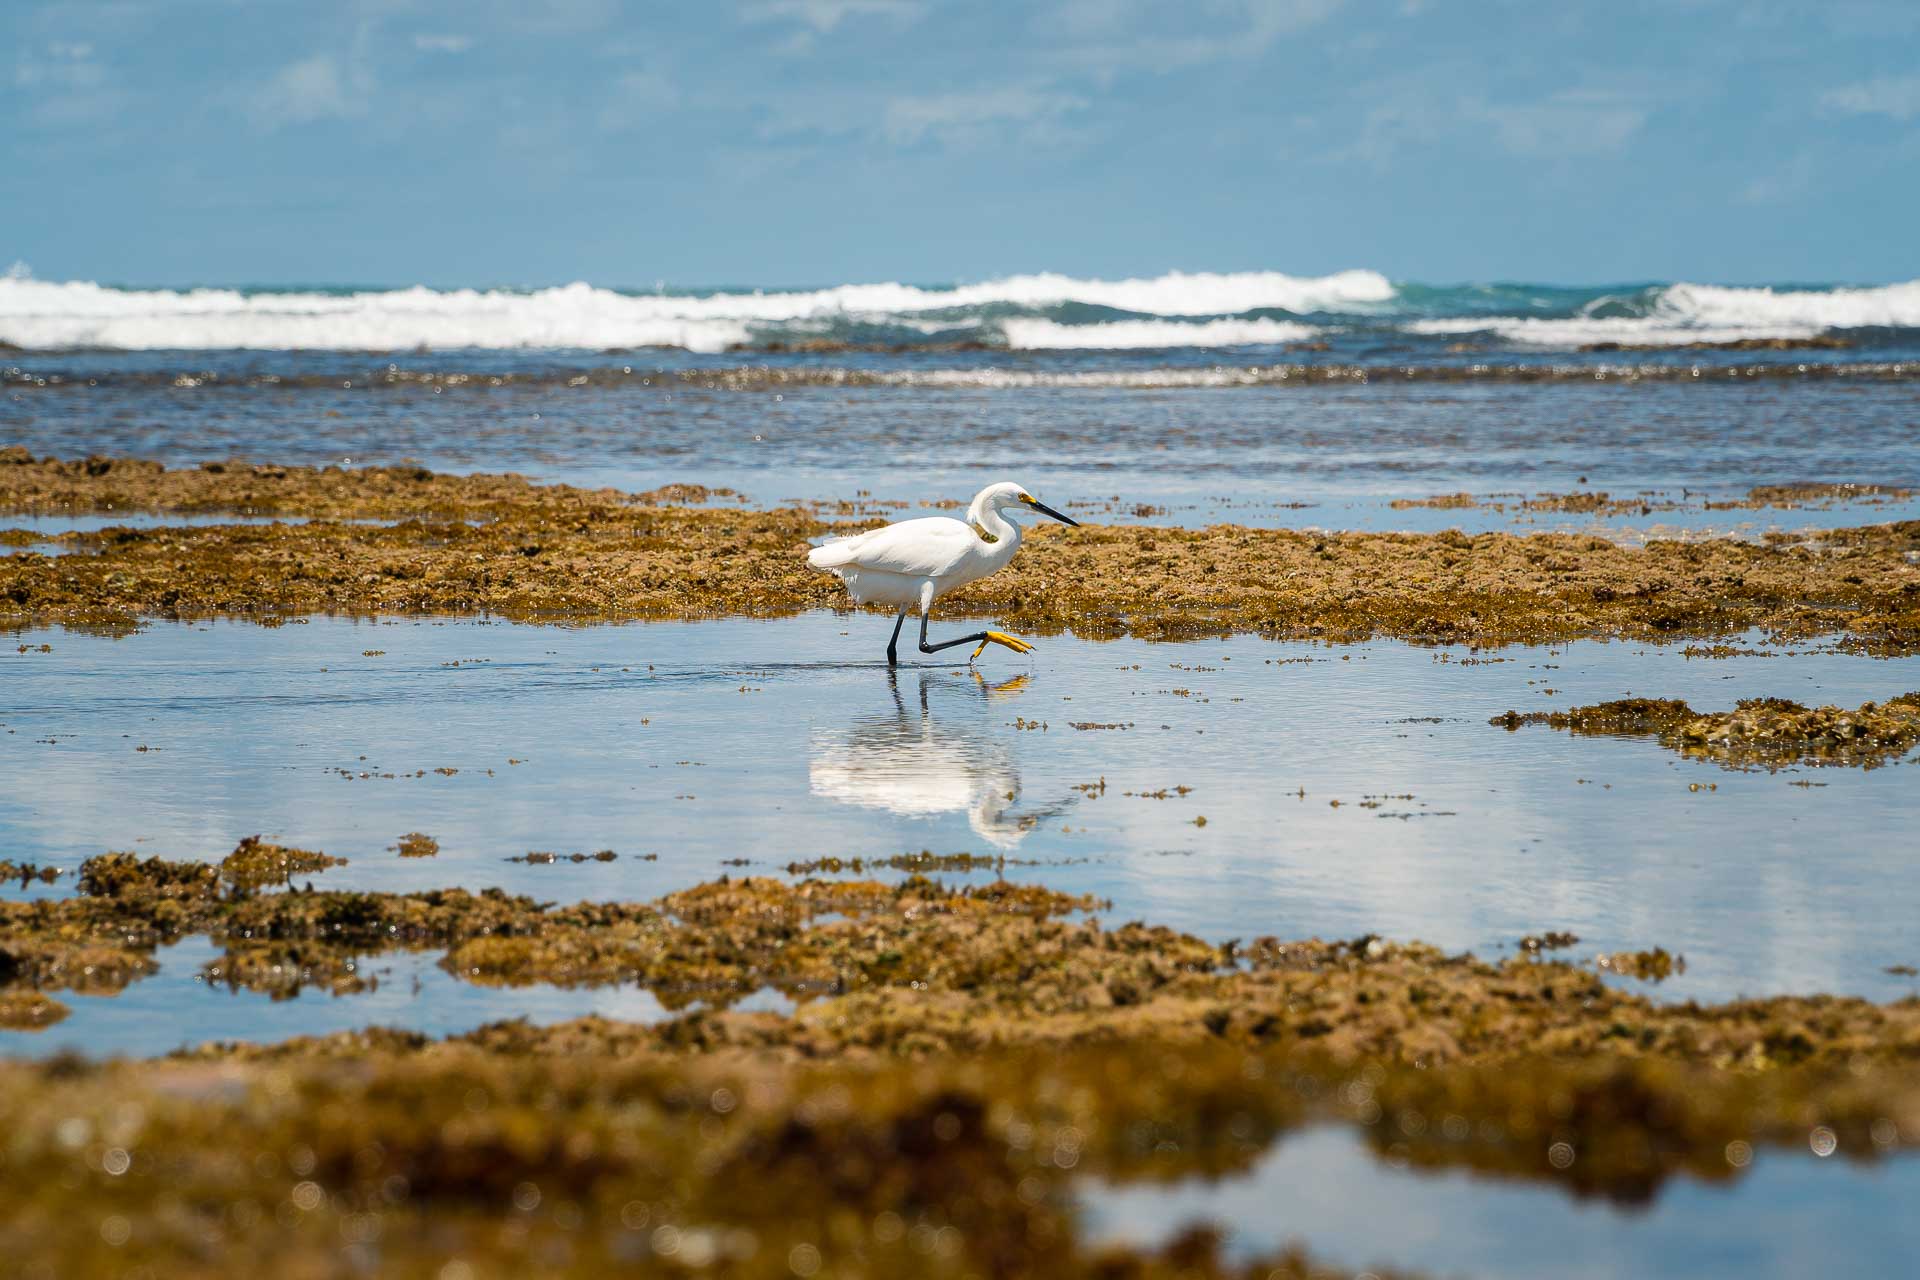 An egret walking on corals by the beach